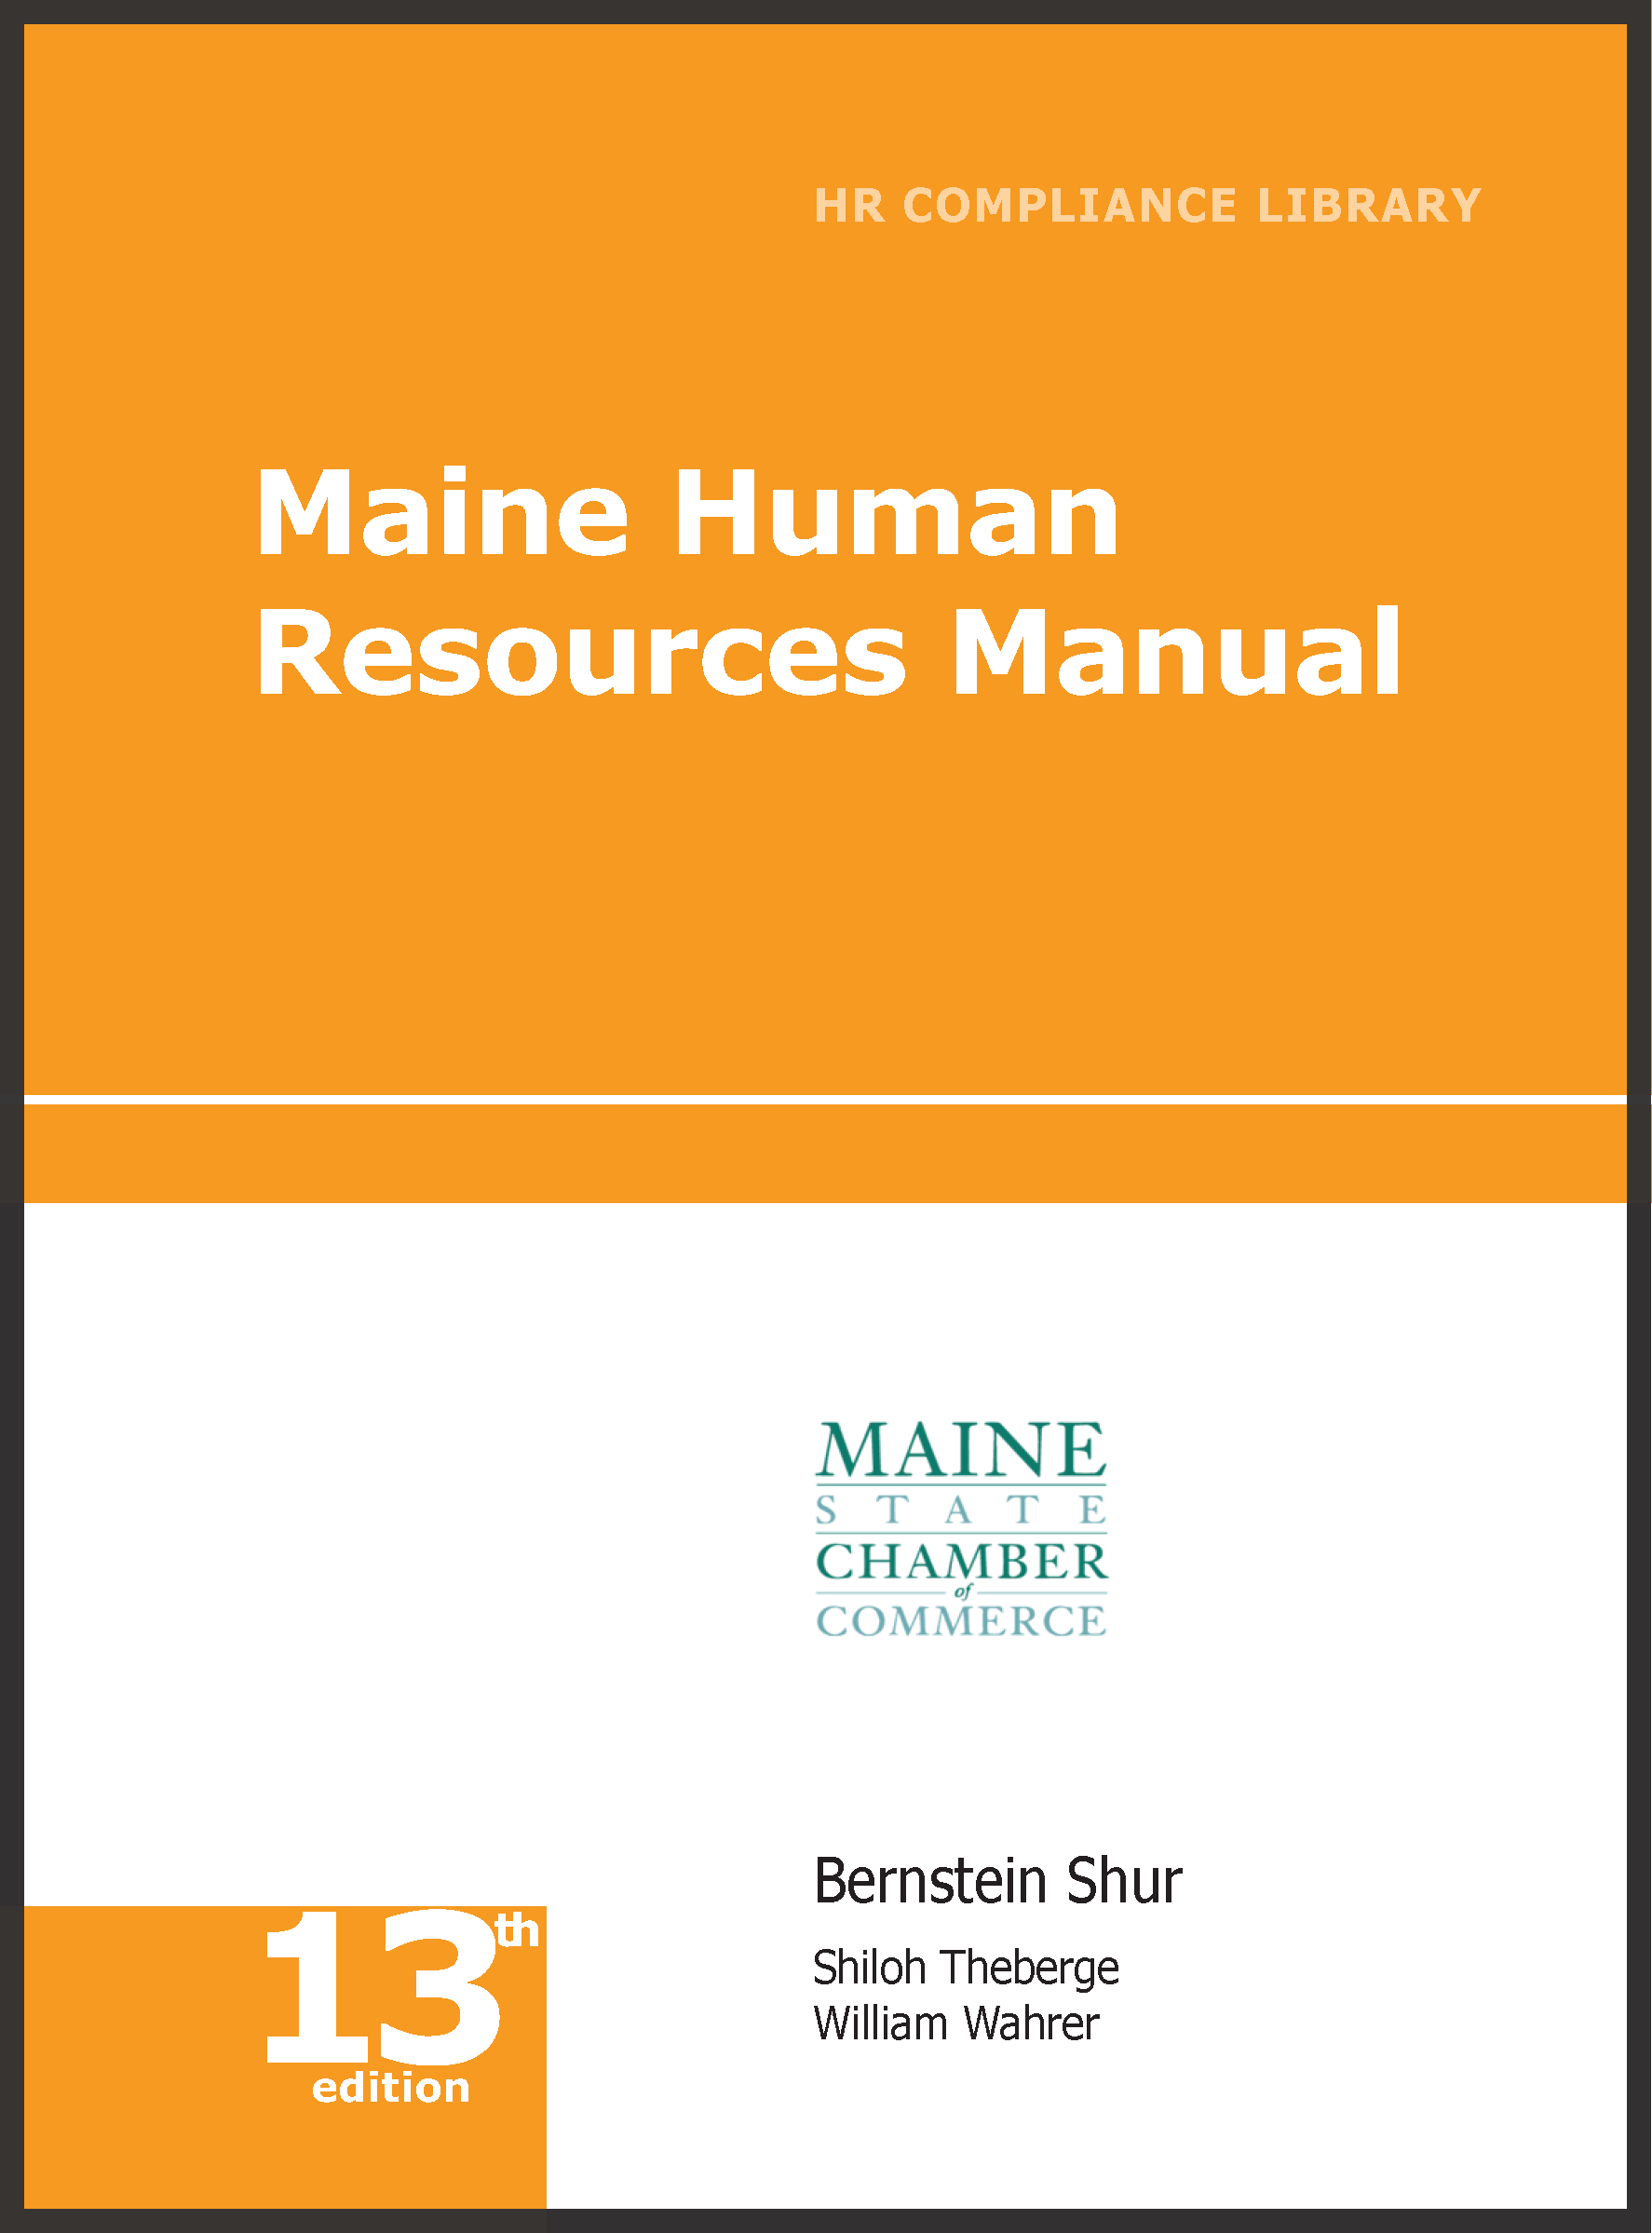 Maine Human Resources Library employment law image, remote work, labor laws, employment laws, right to work, order of protection, minimum wage